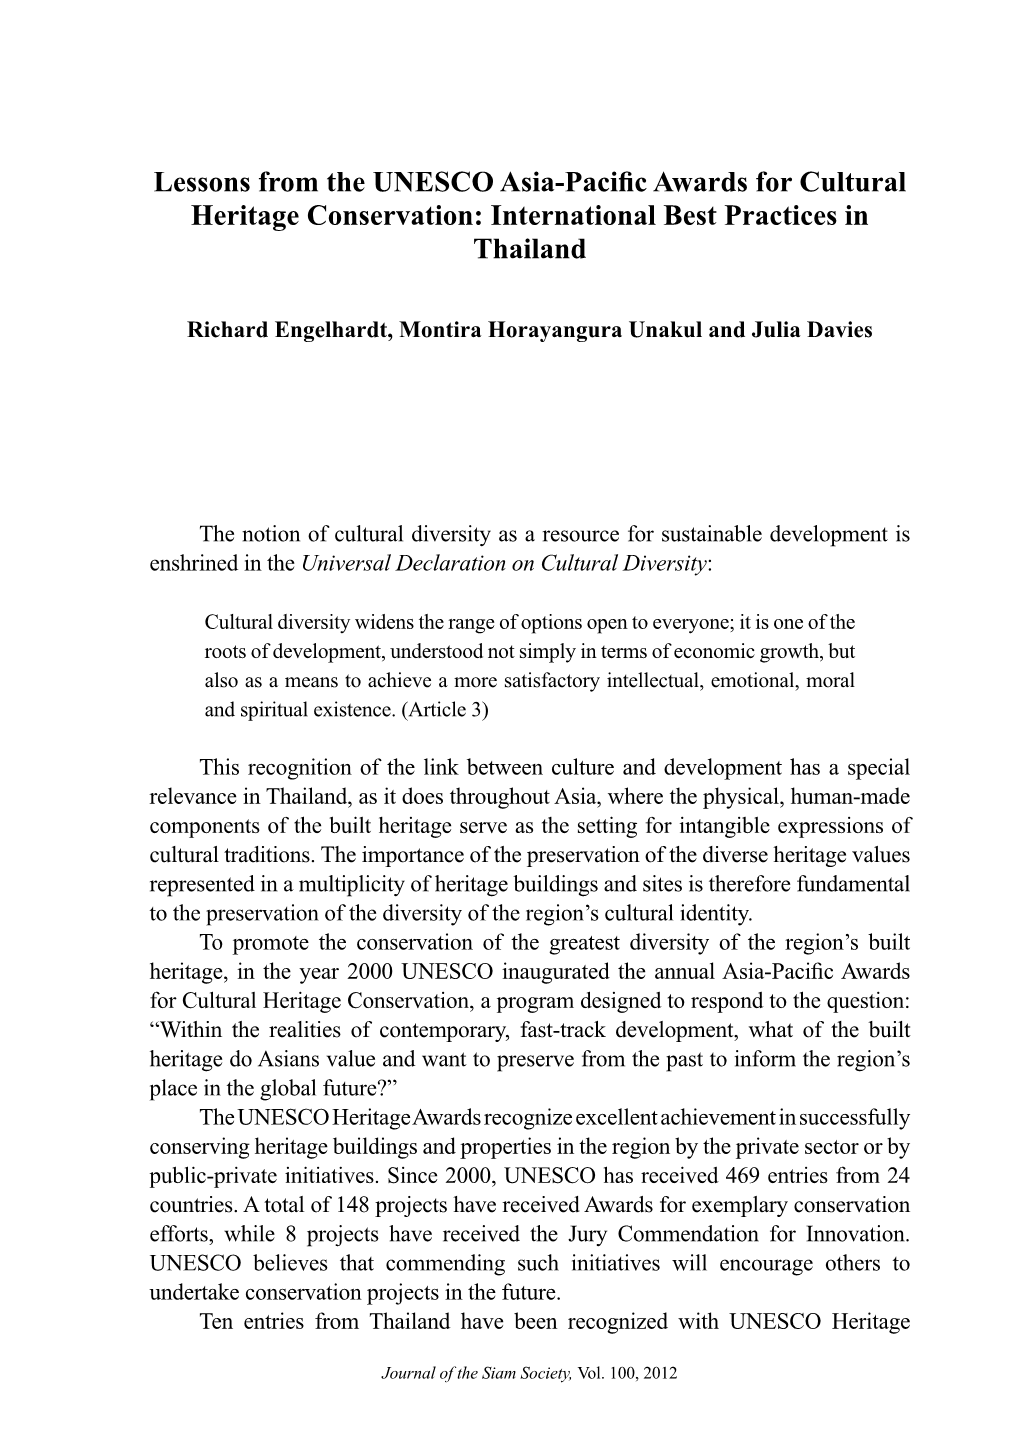 Lessons from the UNESCO Asia-Pacific Awards for Cultural Heritage Conservation: International Best Practices in Thailand